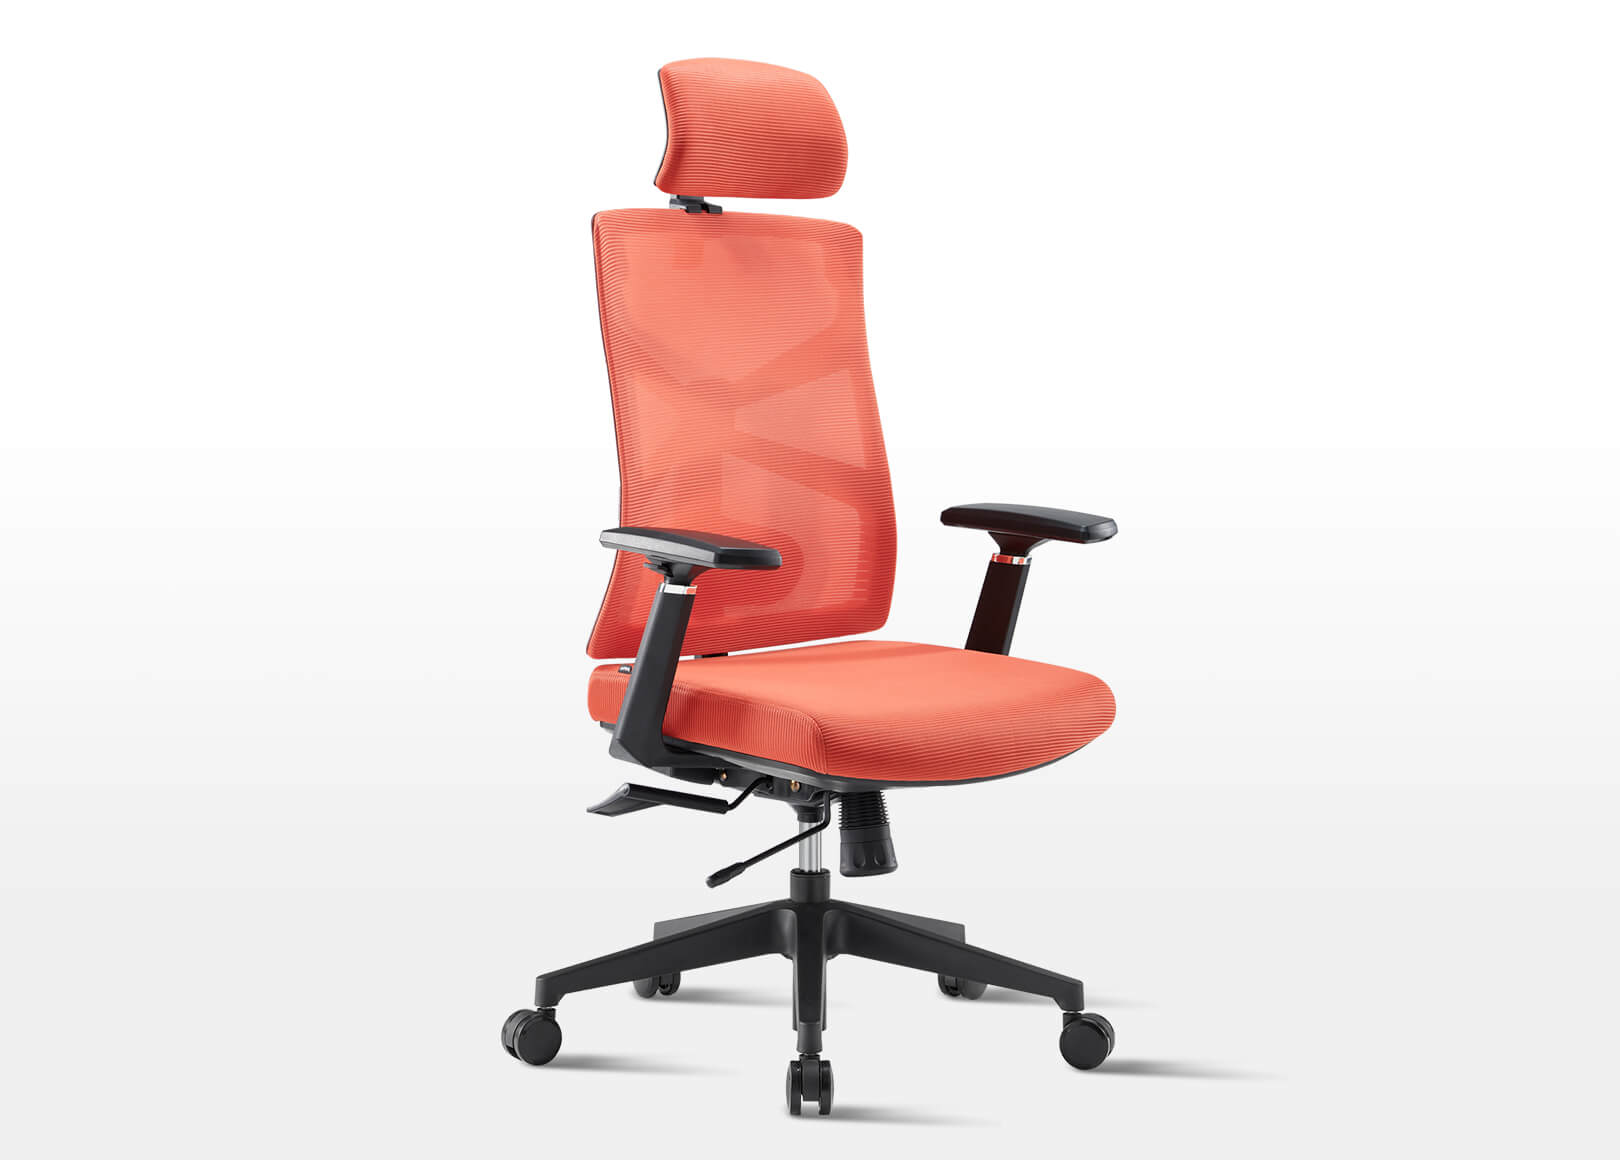 Ergonomic Mesh Office Chair Sunaofe Voyager Pro with Orange Finish - Adjustable Lumbar Support, 3D Armrests, and Lockable Backrest